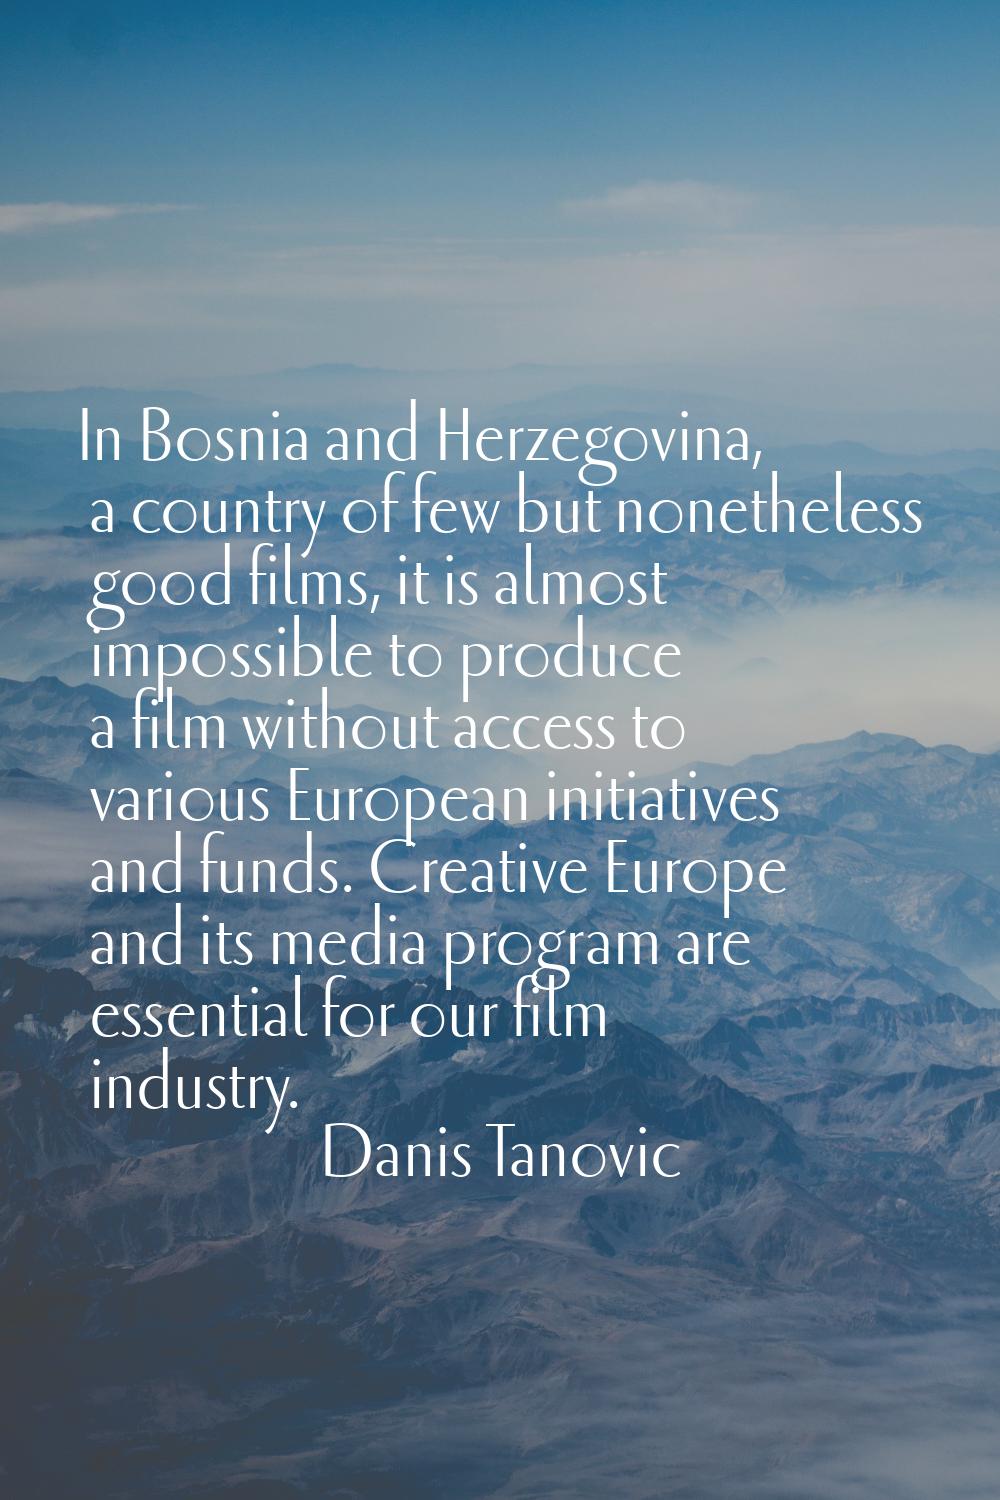 In Bosnia and Herzegovina, a country of few but nonetheless good films, it is almost impossible to 